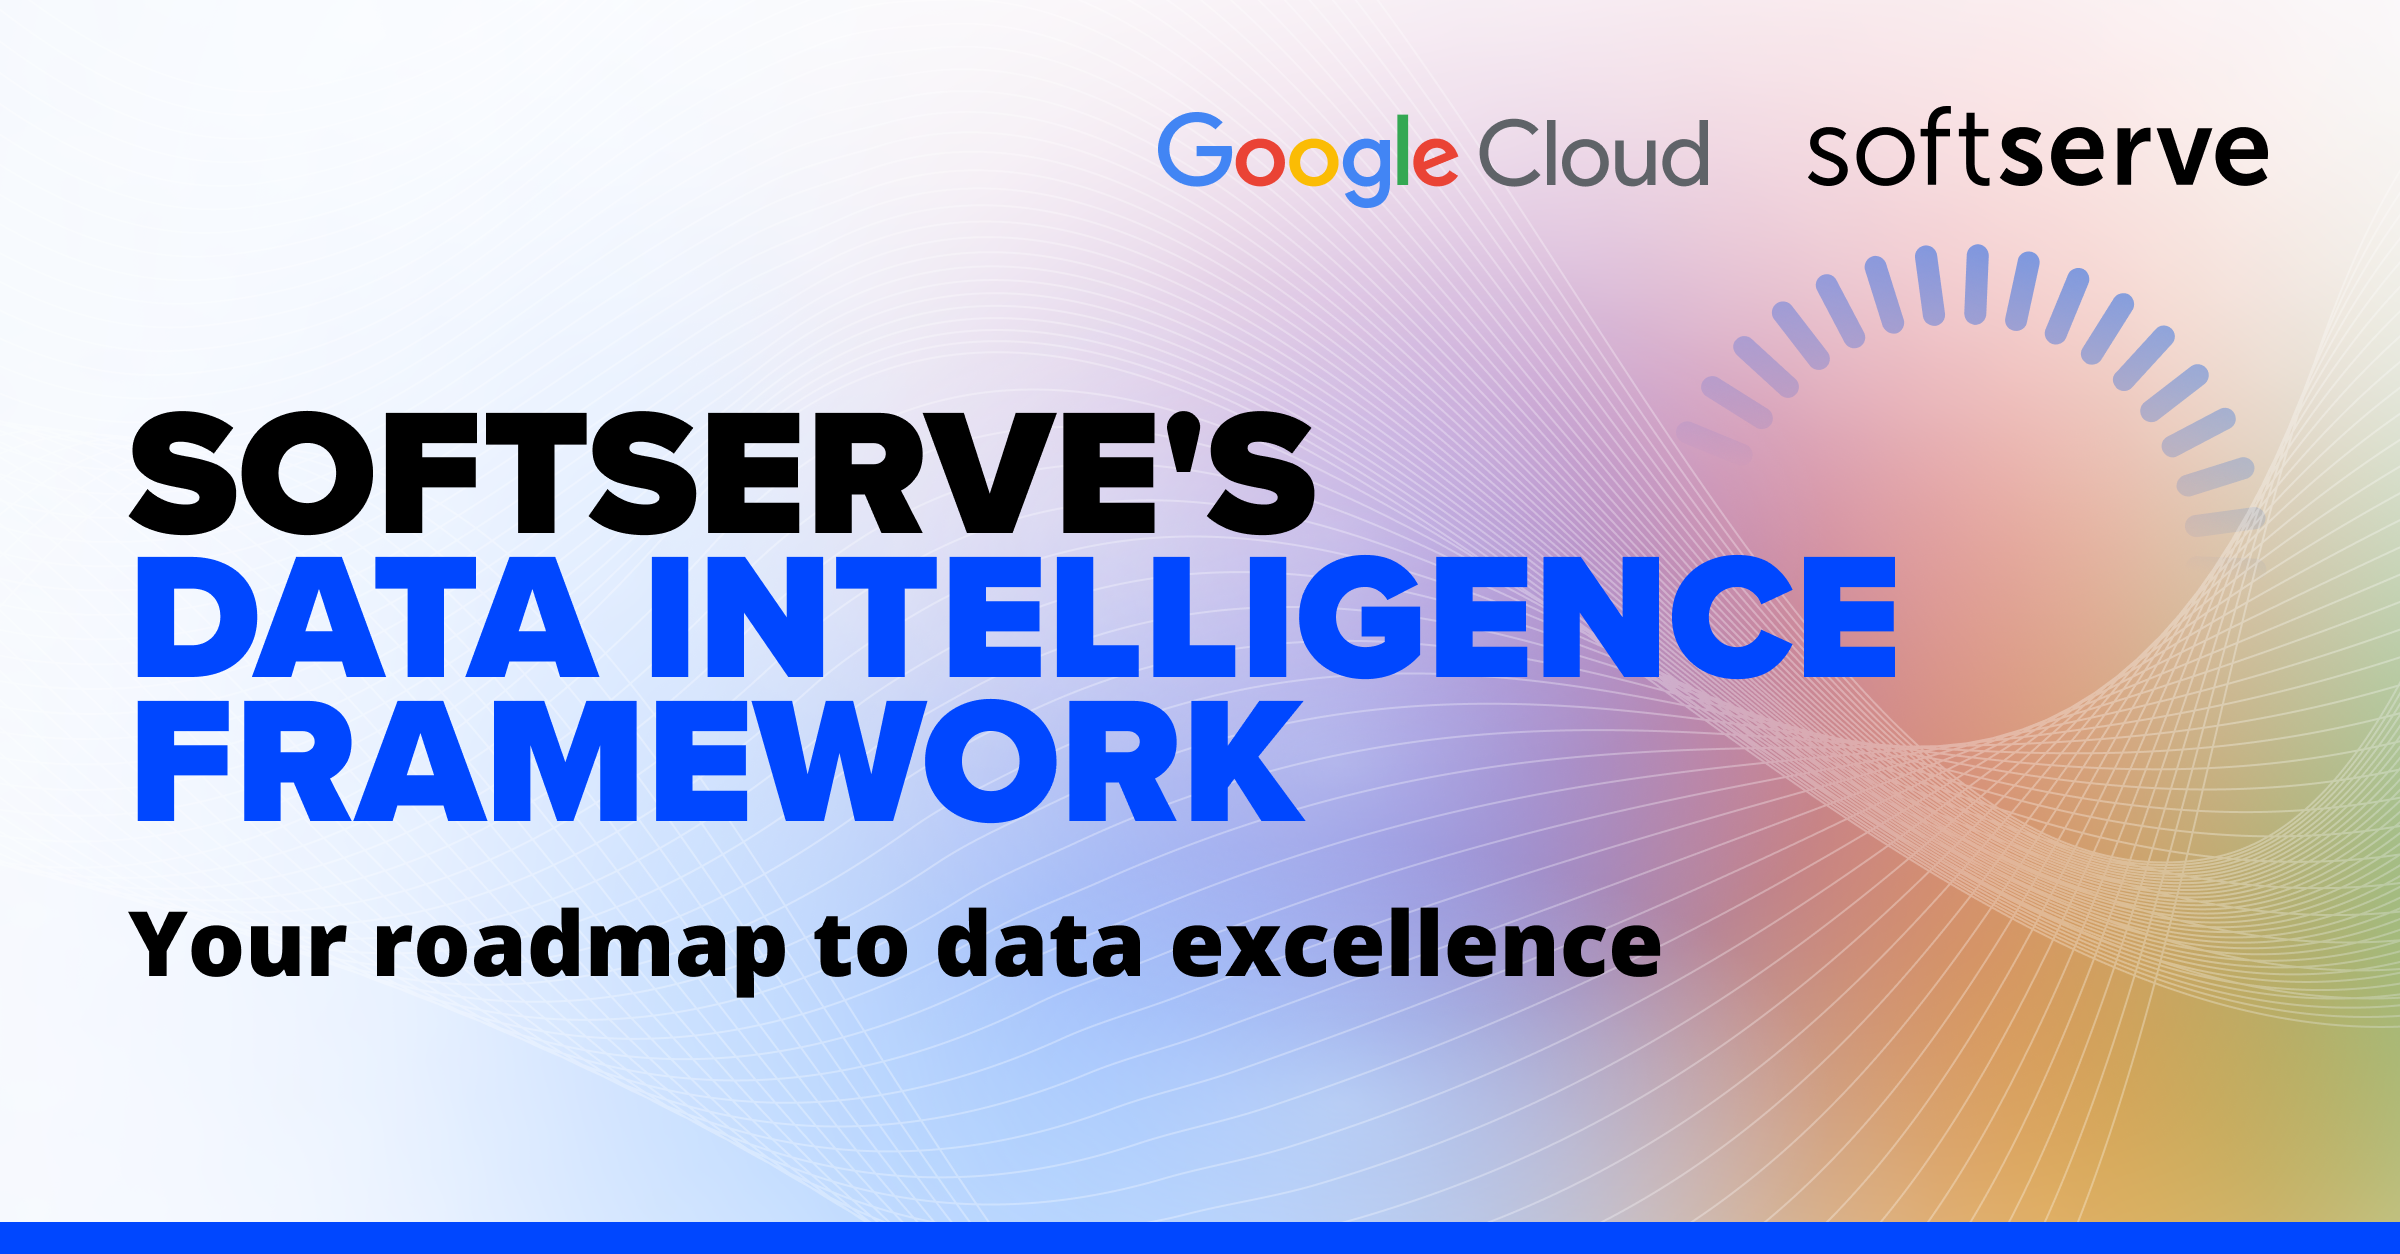 softserve-launches-data-intelligence-framework-for-google-cloud-to-drive-ai-adoption-social